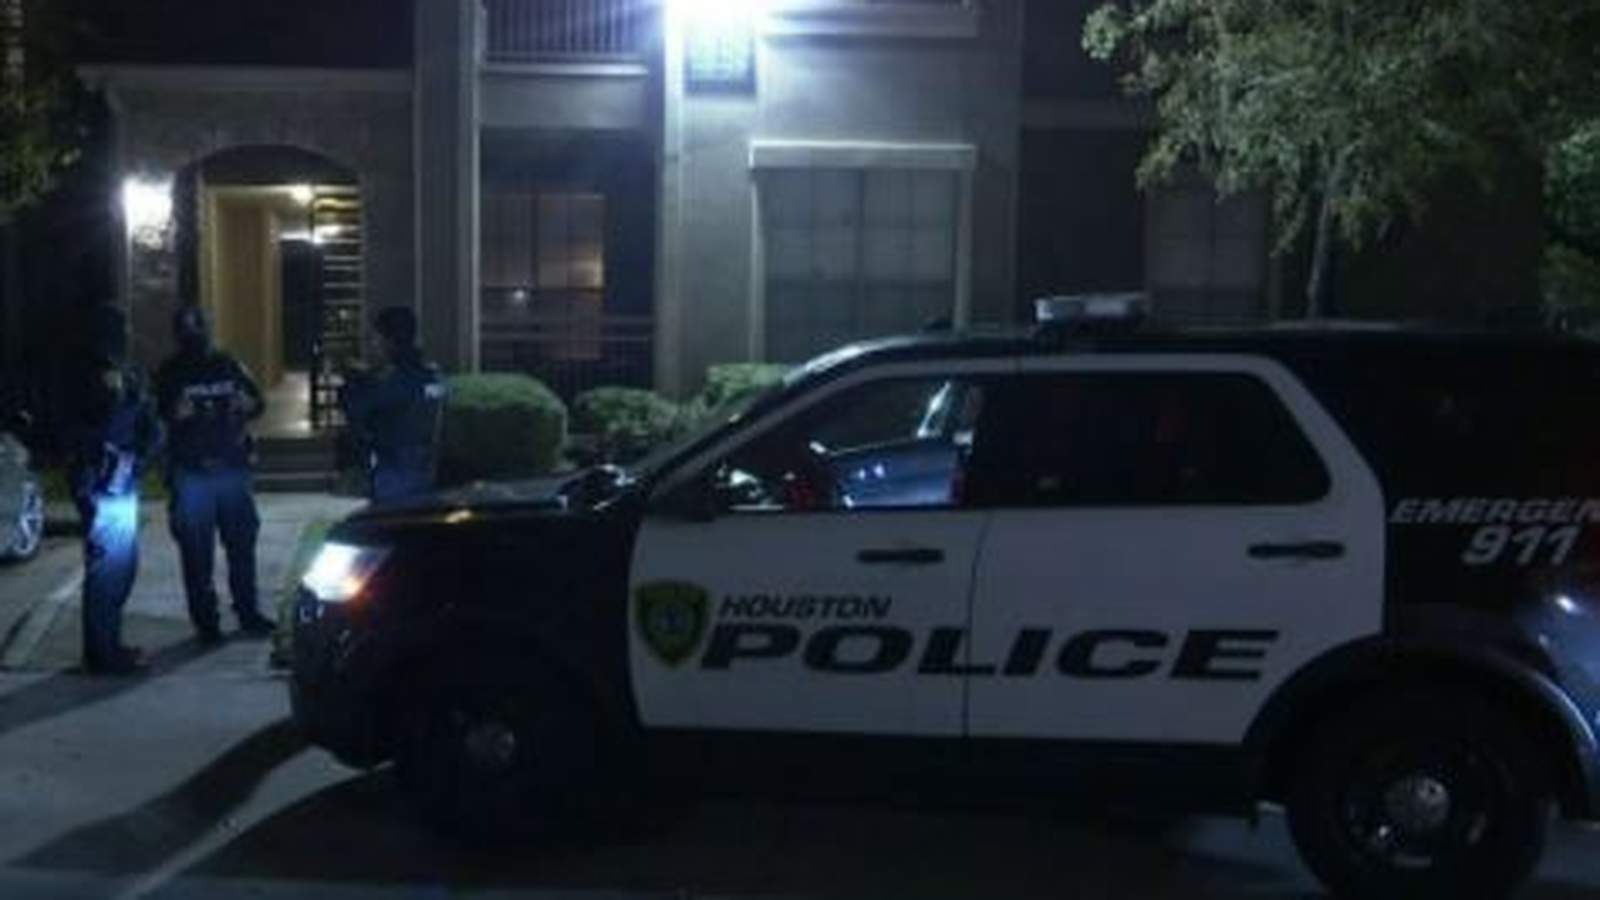 Man killed after gun accidentally goes off in west Houston, police say